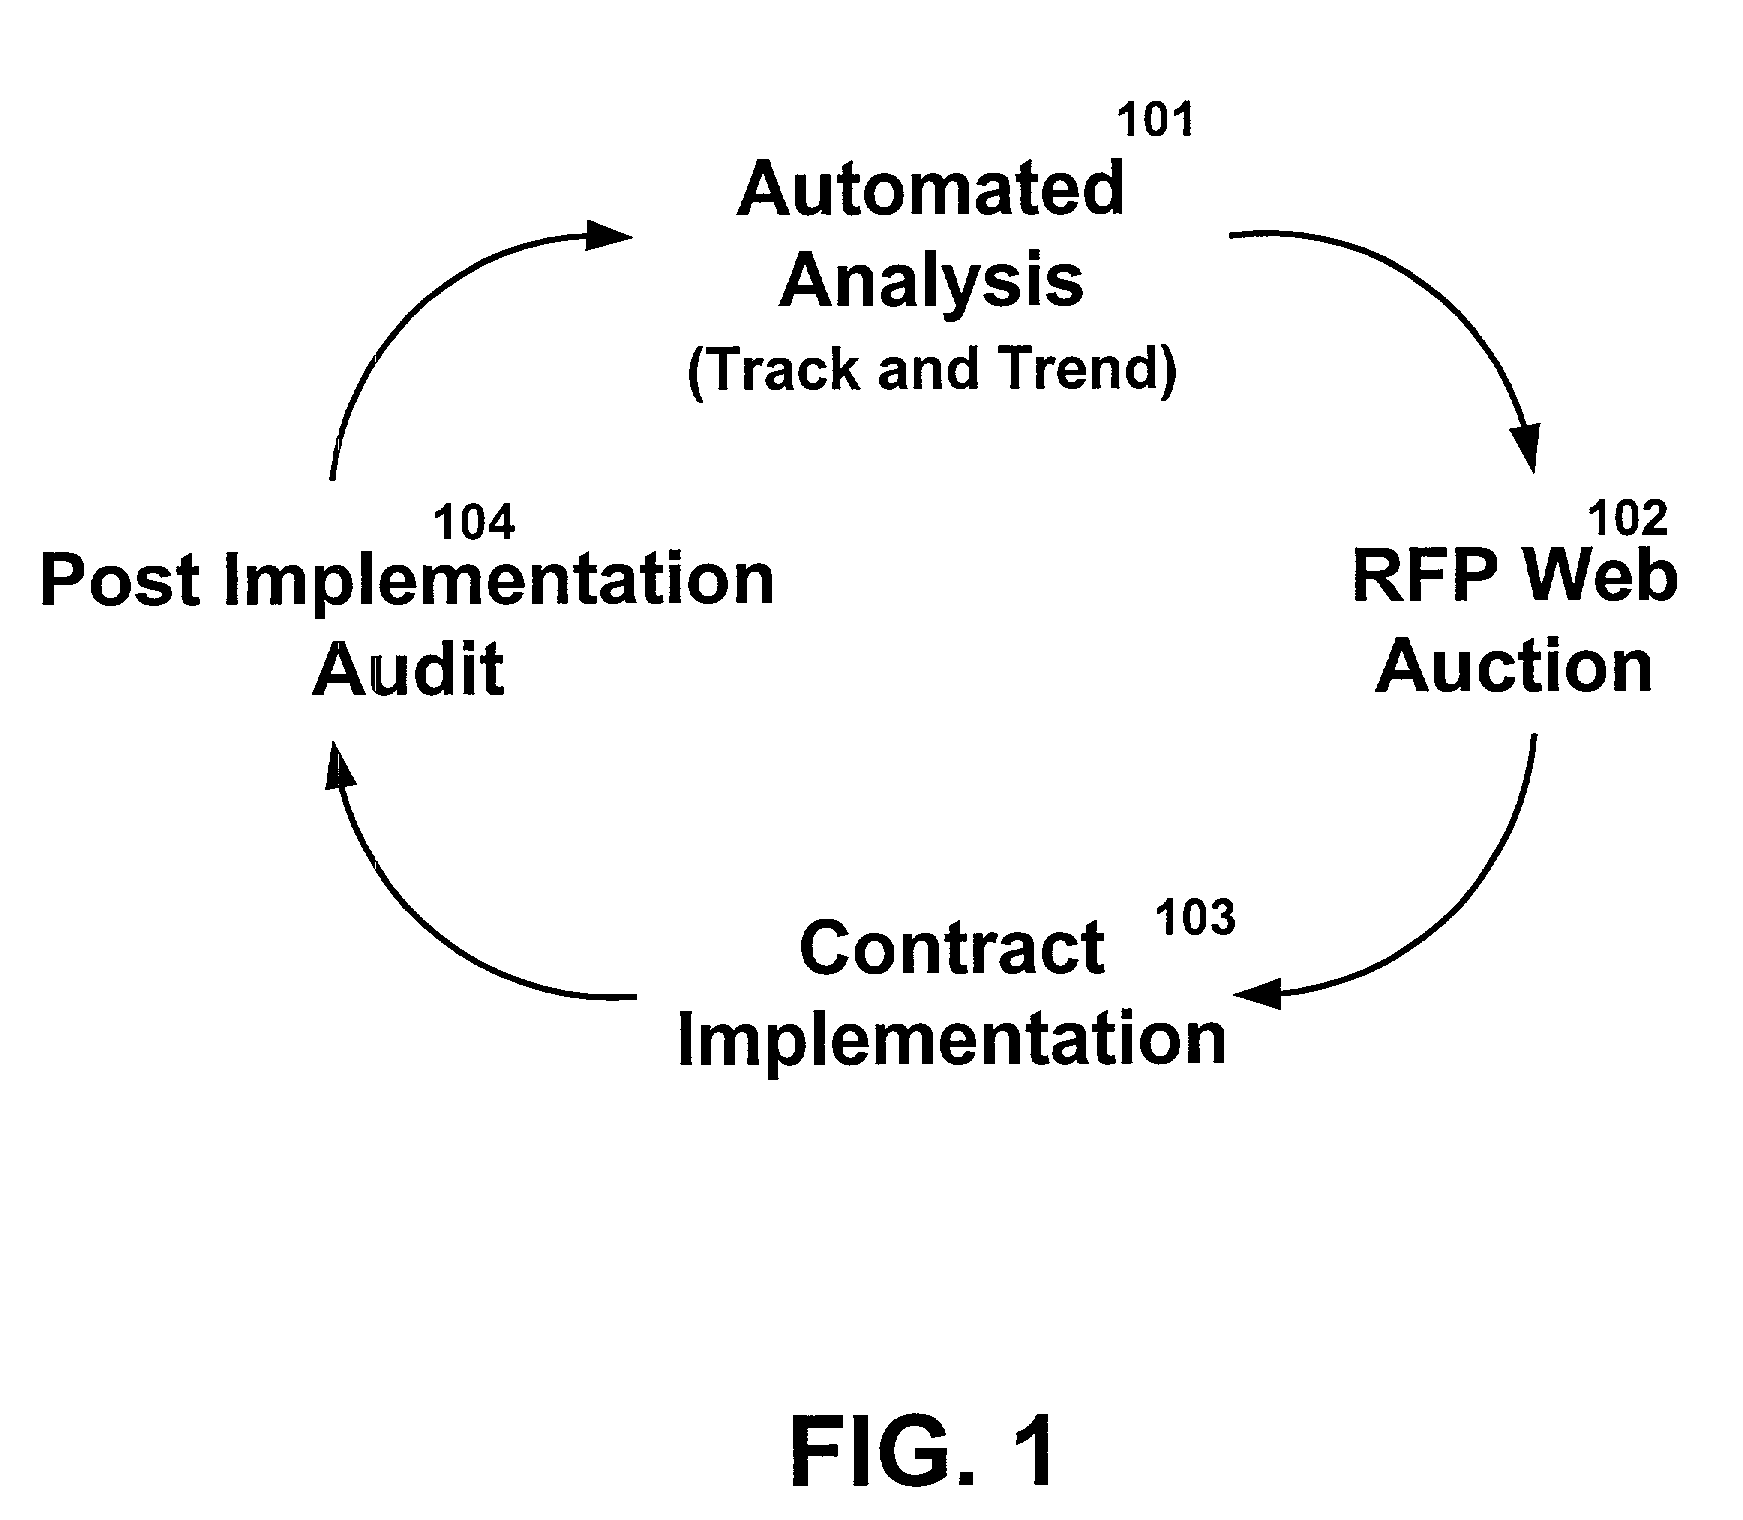 Network reverse auction and spending analysis methods